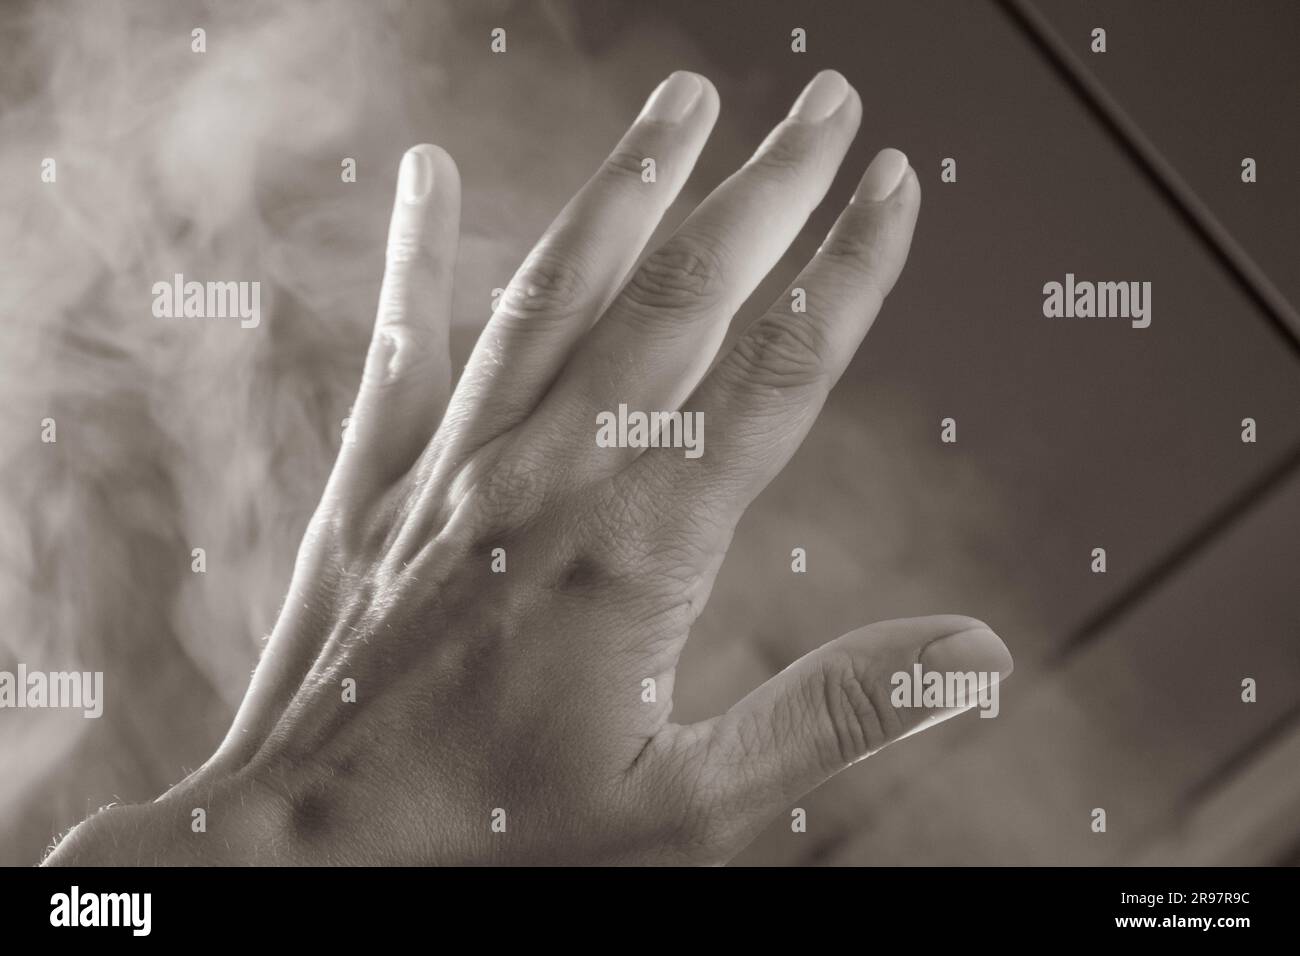 Gesture Male Hand Open Palm with Five Fingers Stock Photo - Image of  people, human: 104884132